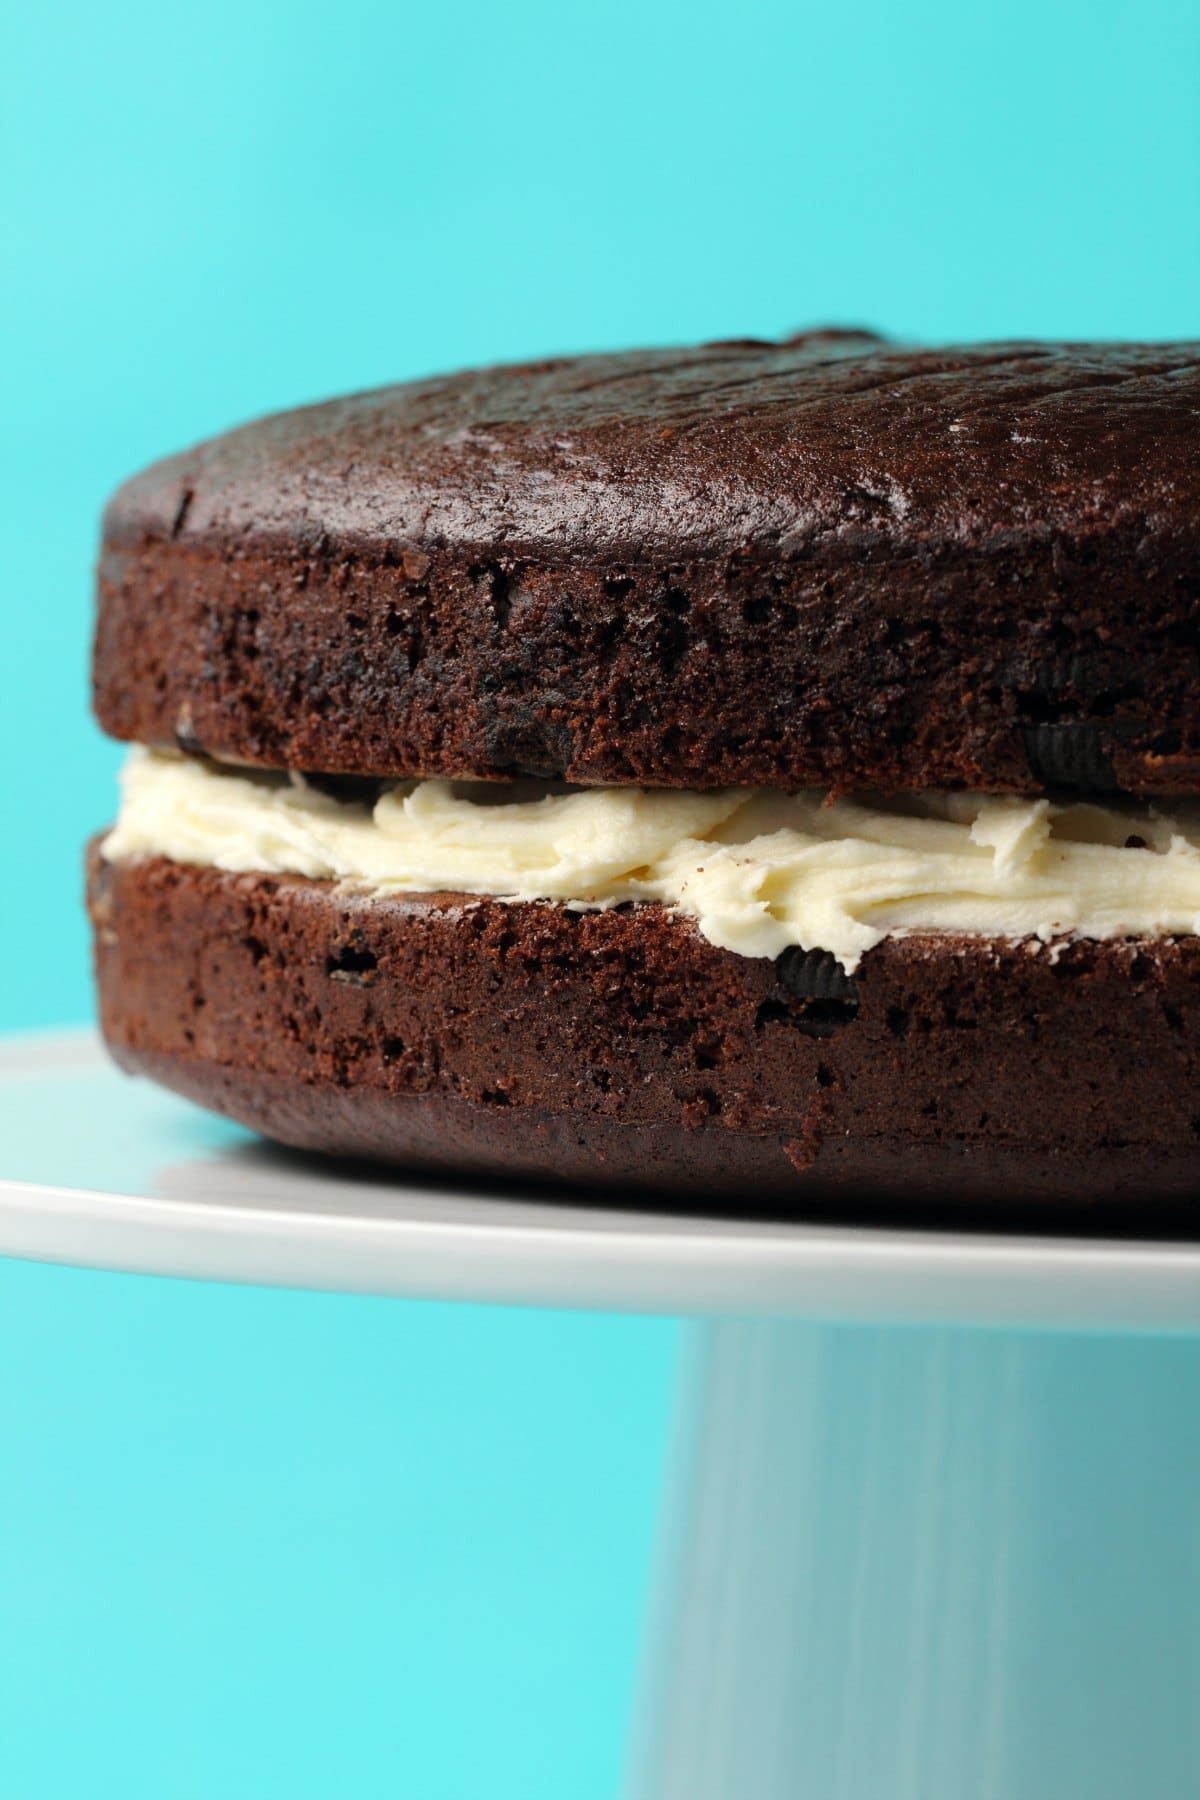 Vegan oreo cake with vanilla frosting in the middle.